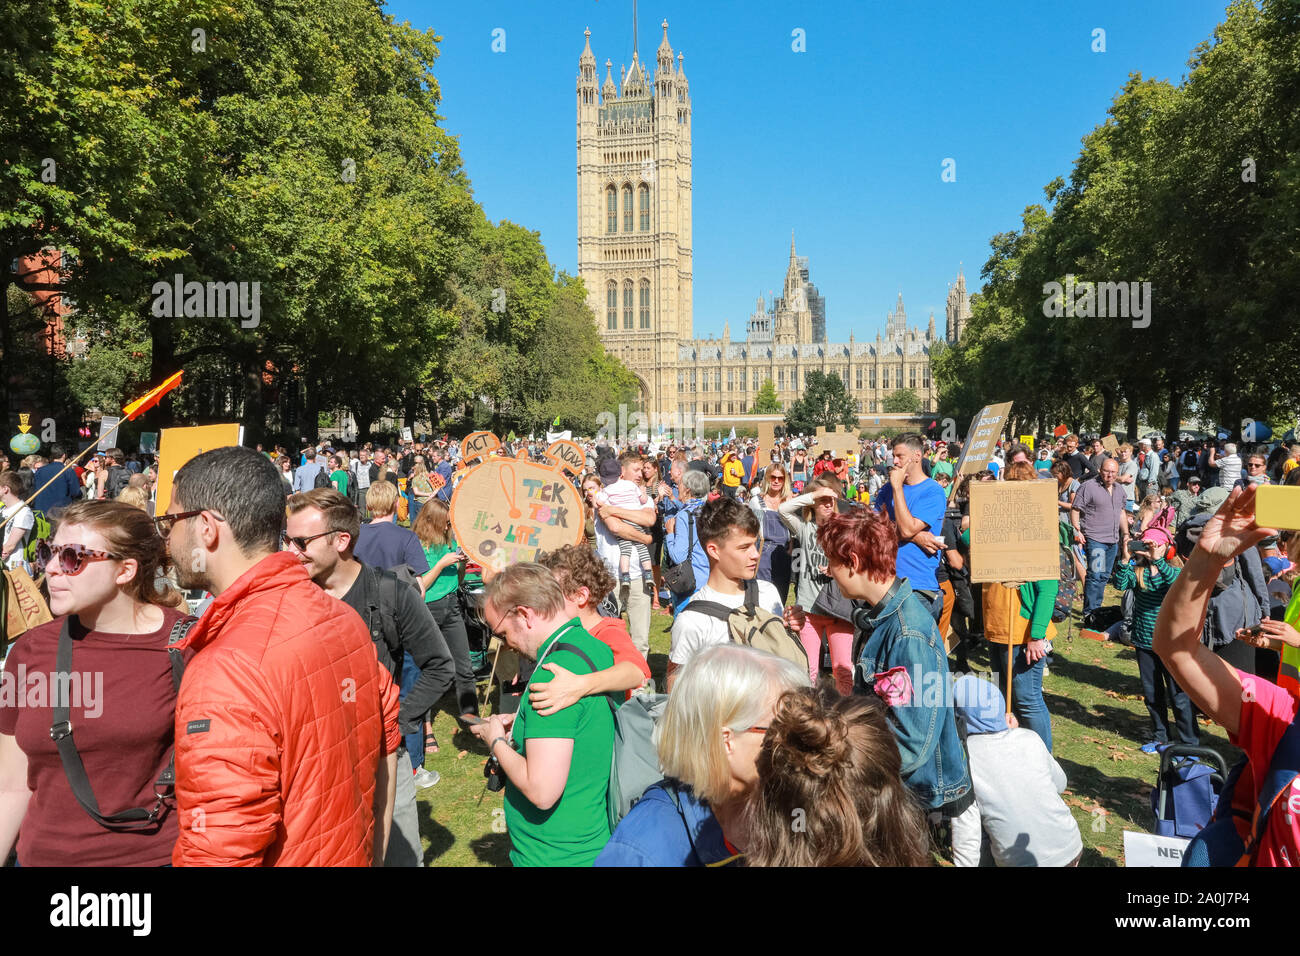 Westminster, London, UK, 20th Sep 2019. Victoria Tower Gardens fills with people, many of the families with small children and strollers. Tens of thousands of children, young people and adults protest for climate action and against the causes of climate change in the British capital. Many similar protests take place in cities around the world in a day of global climate action in an event sparked by the young campaigner Greta Thunberg who attends the global climate strike in New York. Credit: Imageplotter/Alamy Live News Stock Photo